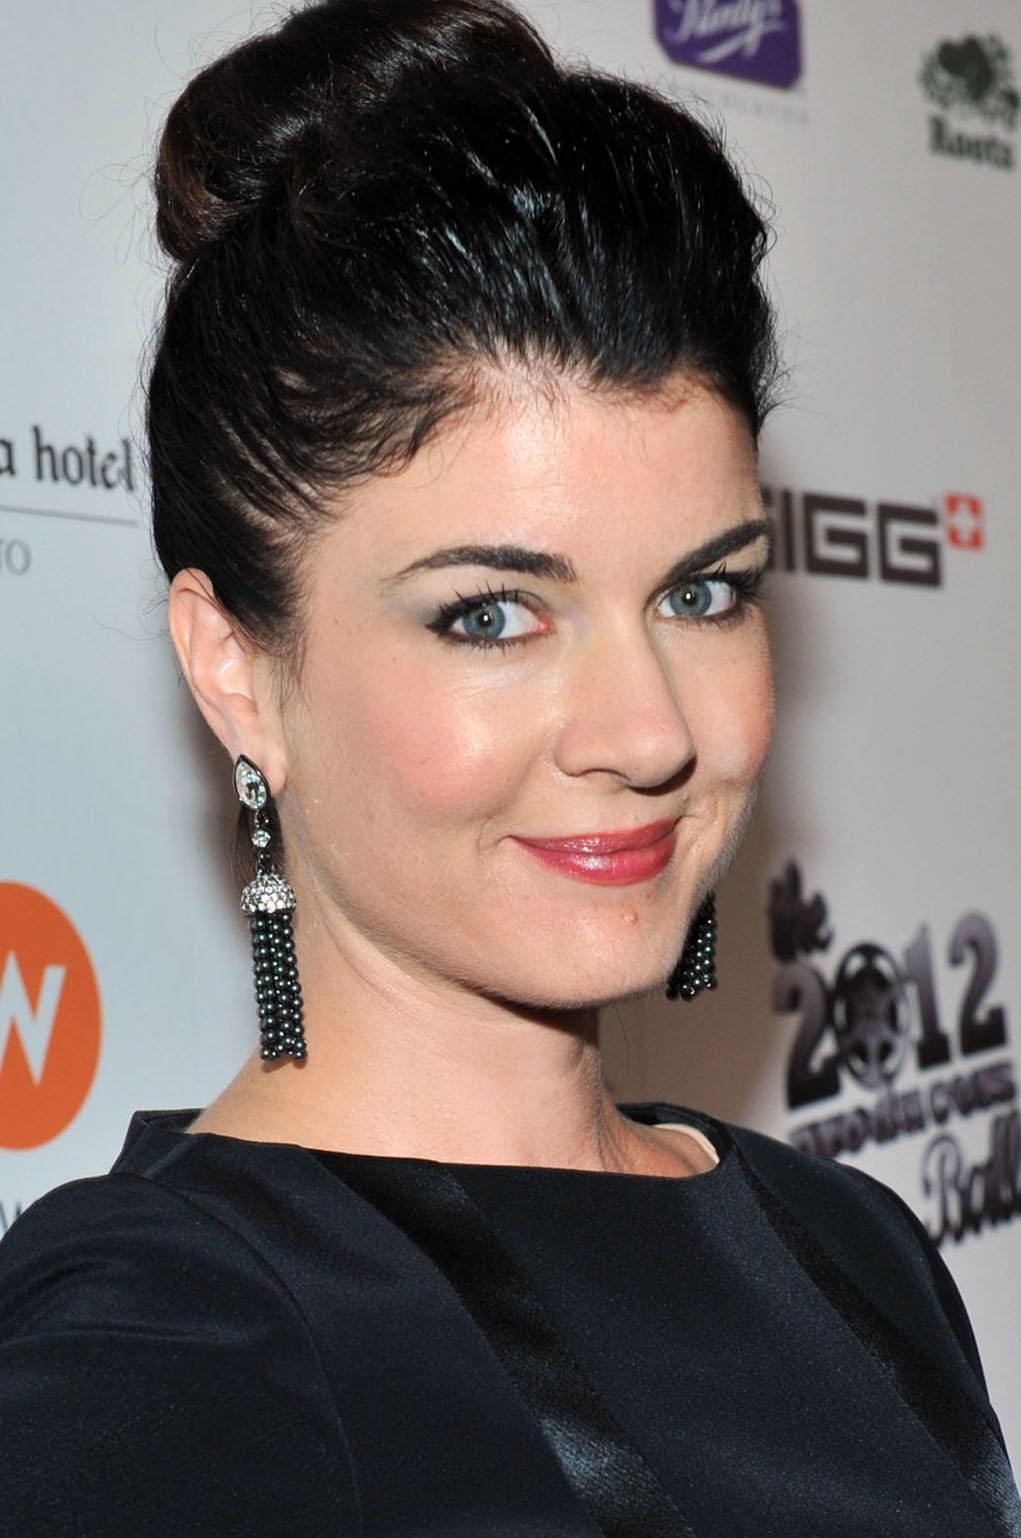 70+ Hot Pictures Of Gabrielle Miller Are Here To Take Your Breath Away 19